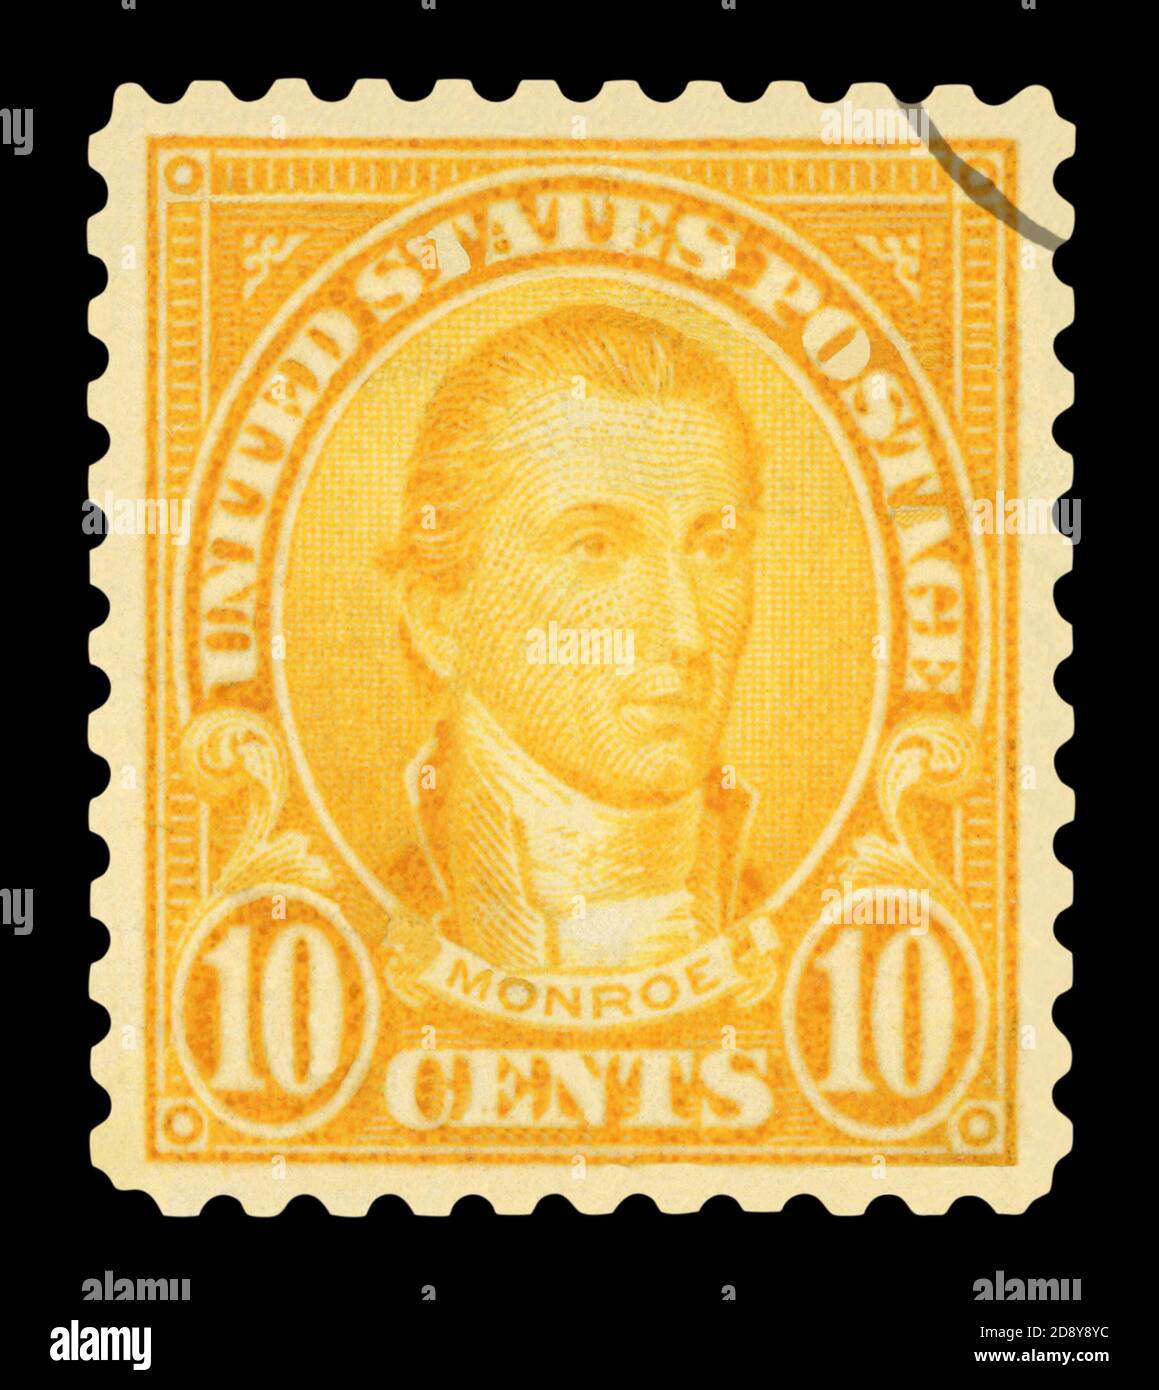 UNITED STATES OF AMERICA - CIRCA 1932: A stamp printed in the USA shows image of President James Monroe, circa 1932 Stock Photo